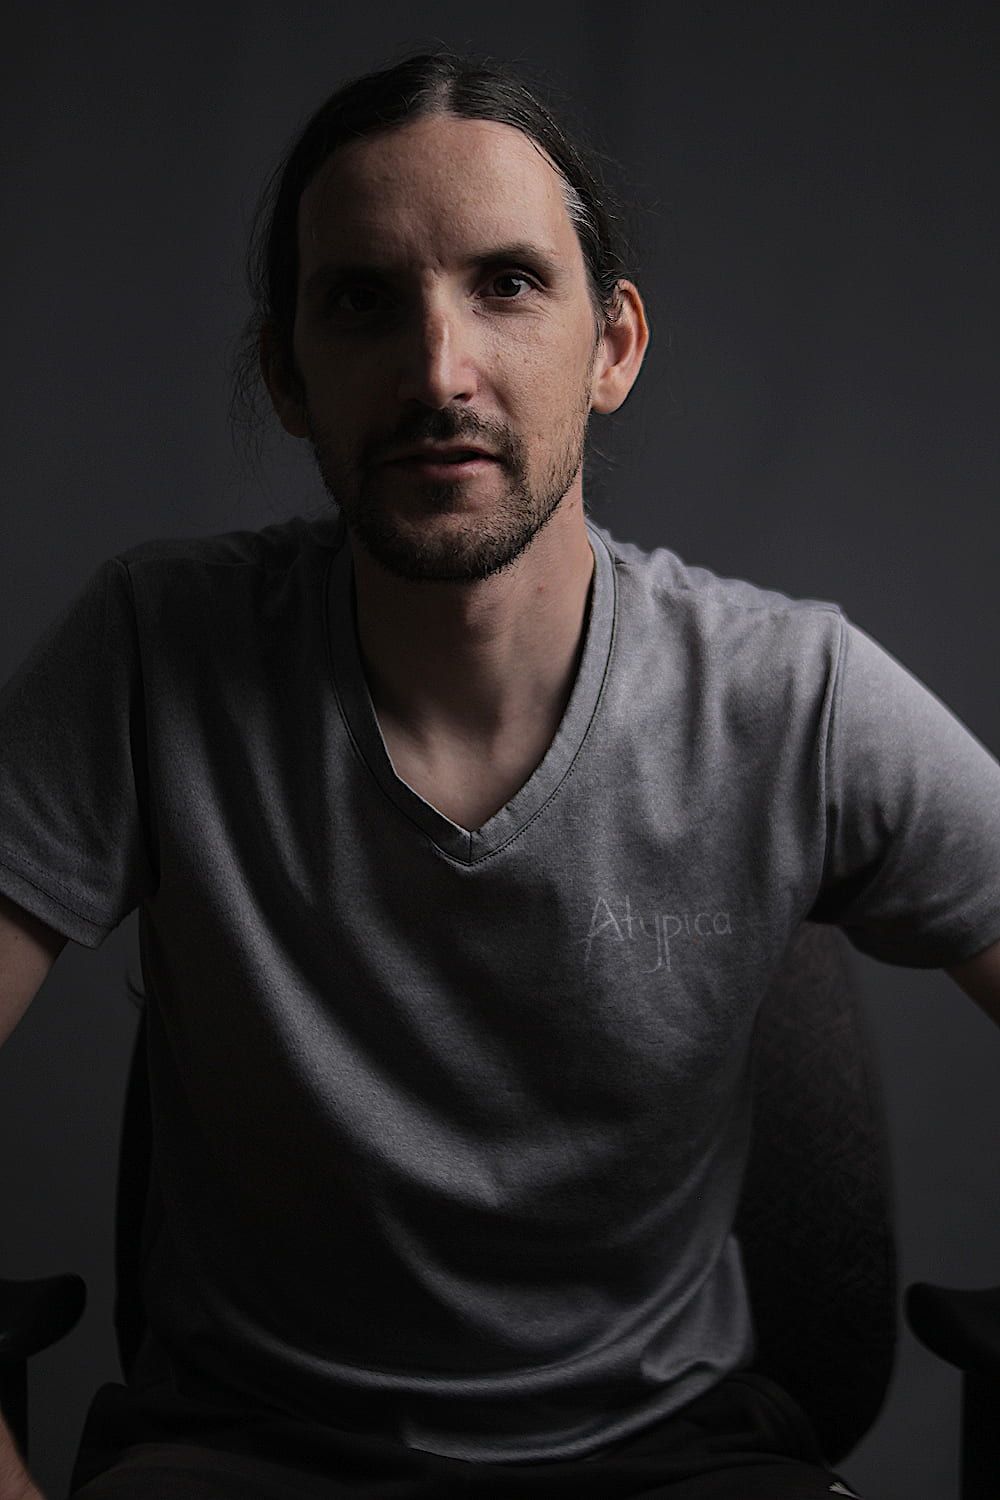 Professional moody portrait of Augustin Delporte (Pragm) looking suspiciously like Peter McKinnon with long hair tied back. Shot in the Atypica studio in Griffintown, Montreal, Canada